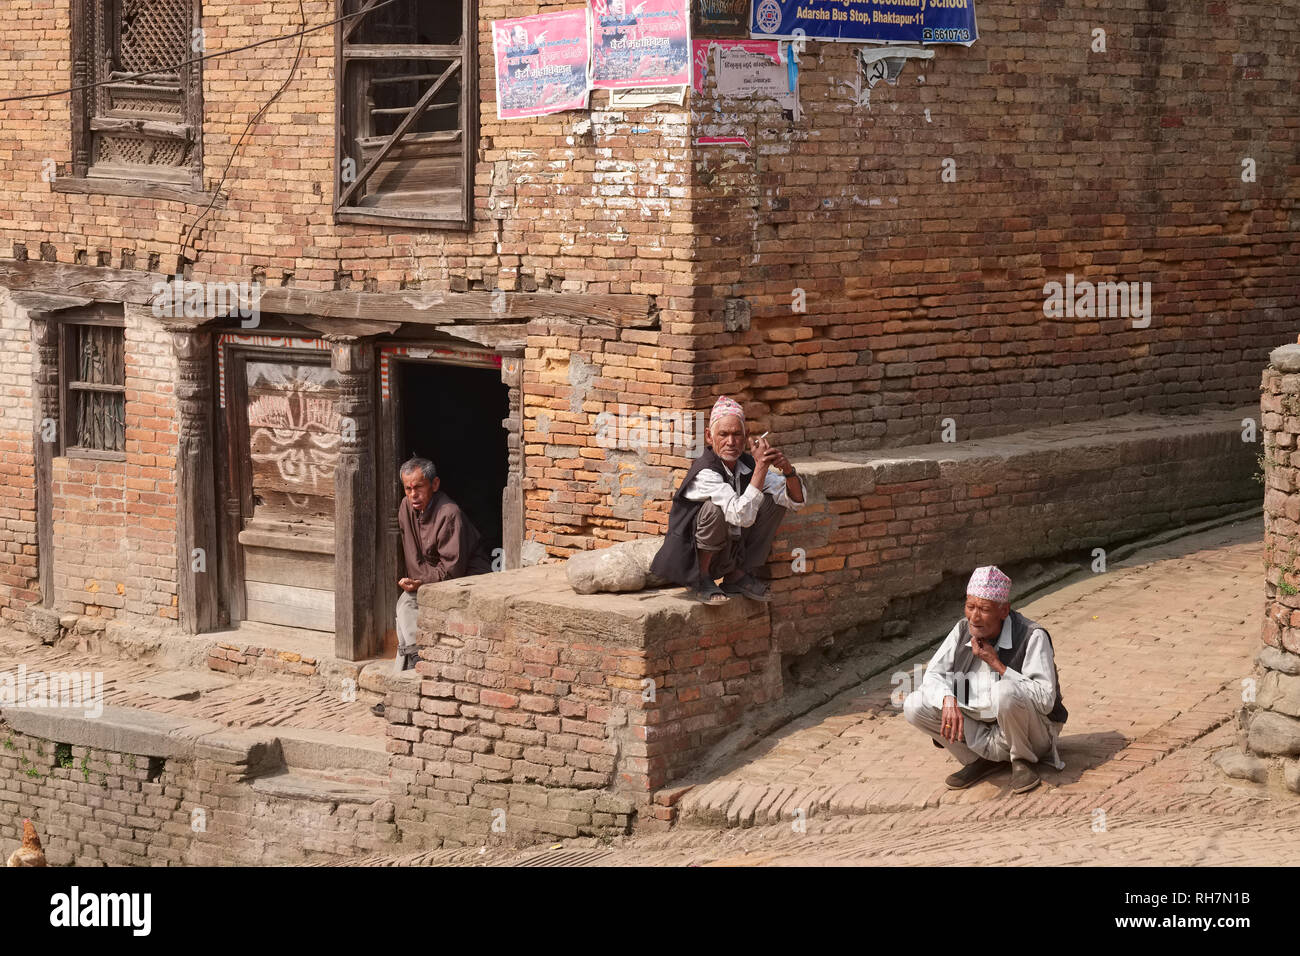 Men of the Newar community in traditional attire, including Nepalese topi (cap),  watching the world go by, Bhaktapur, Kathmandu Valley, Nepal Stock Photo